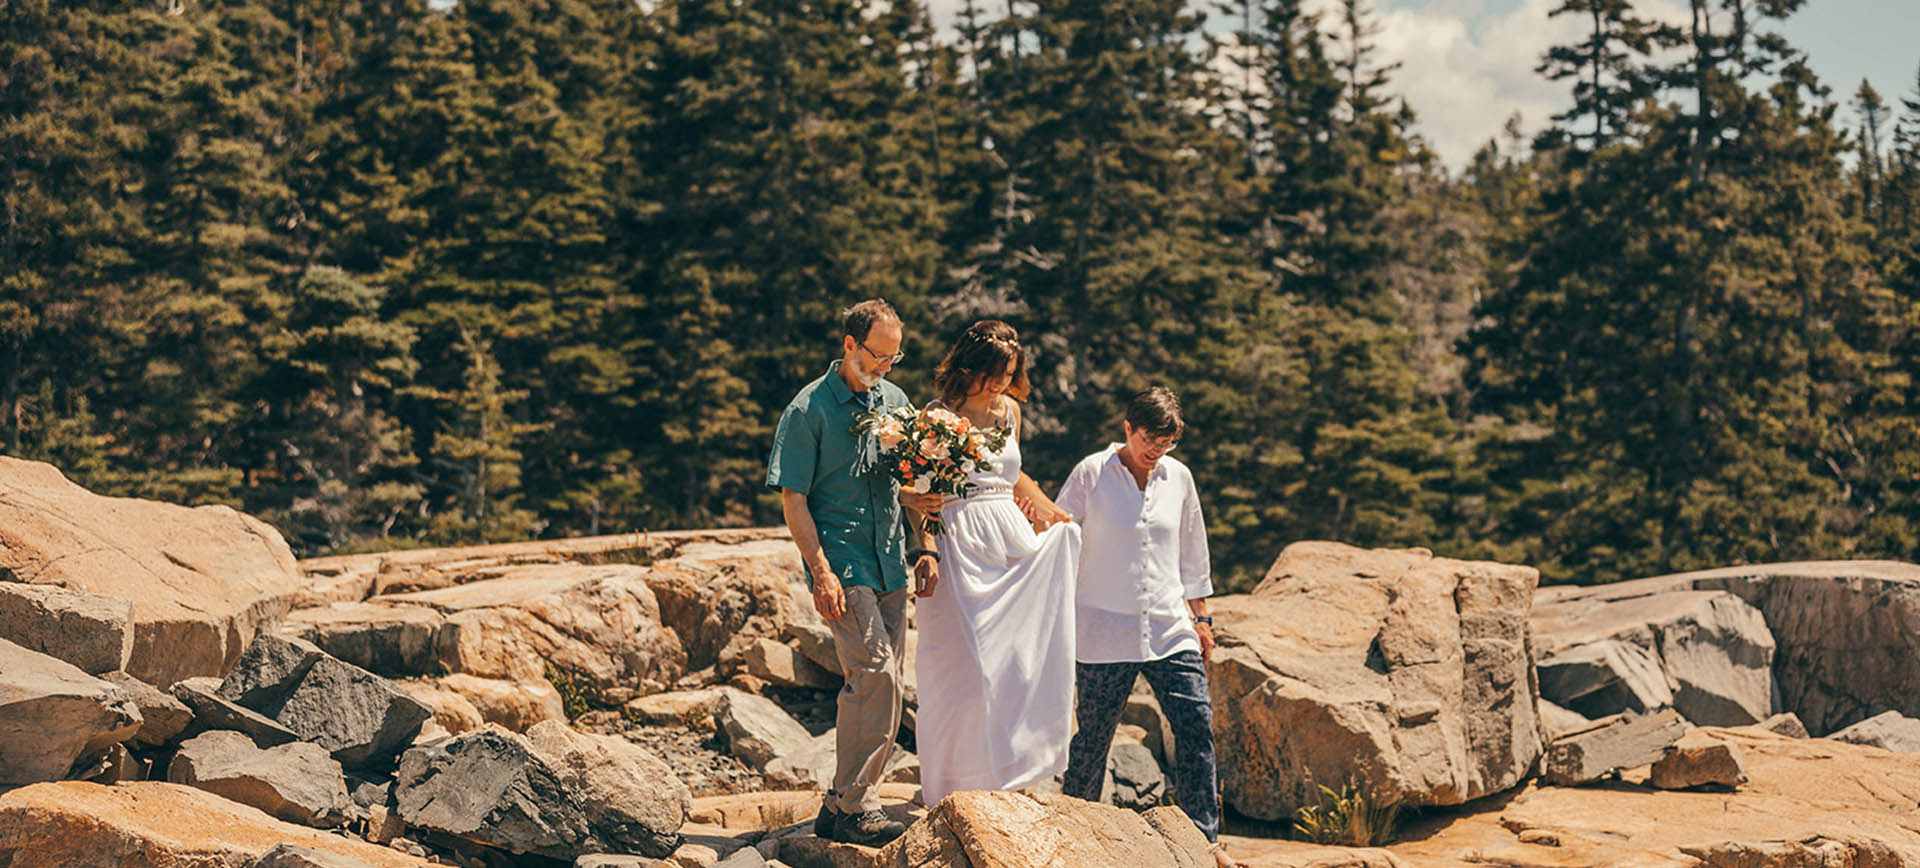 acadia national park wedding - bride & groom at their elopement in maine